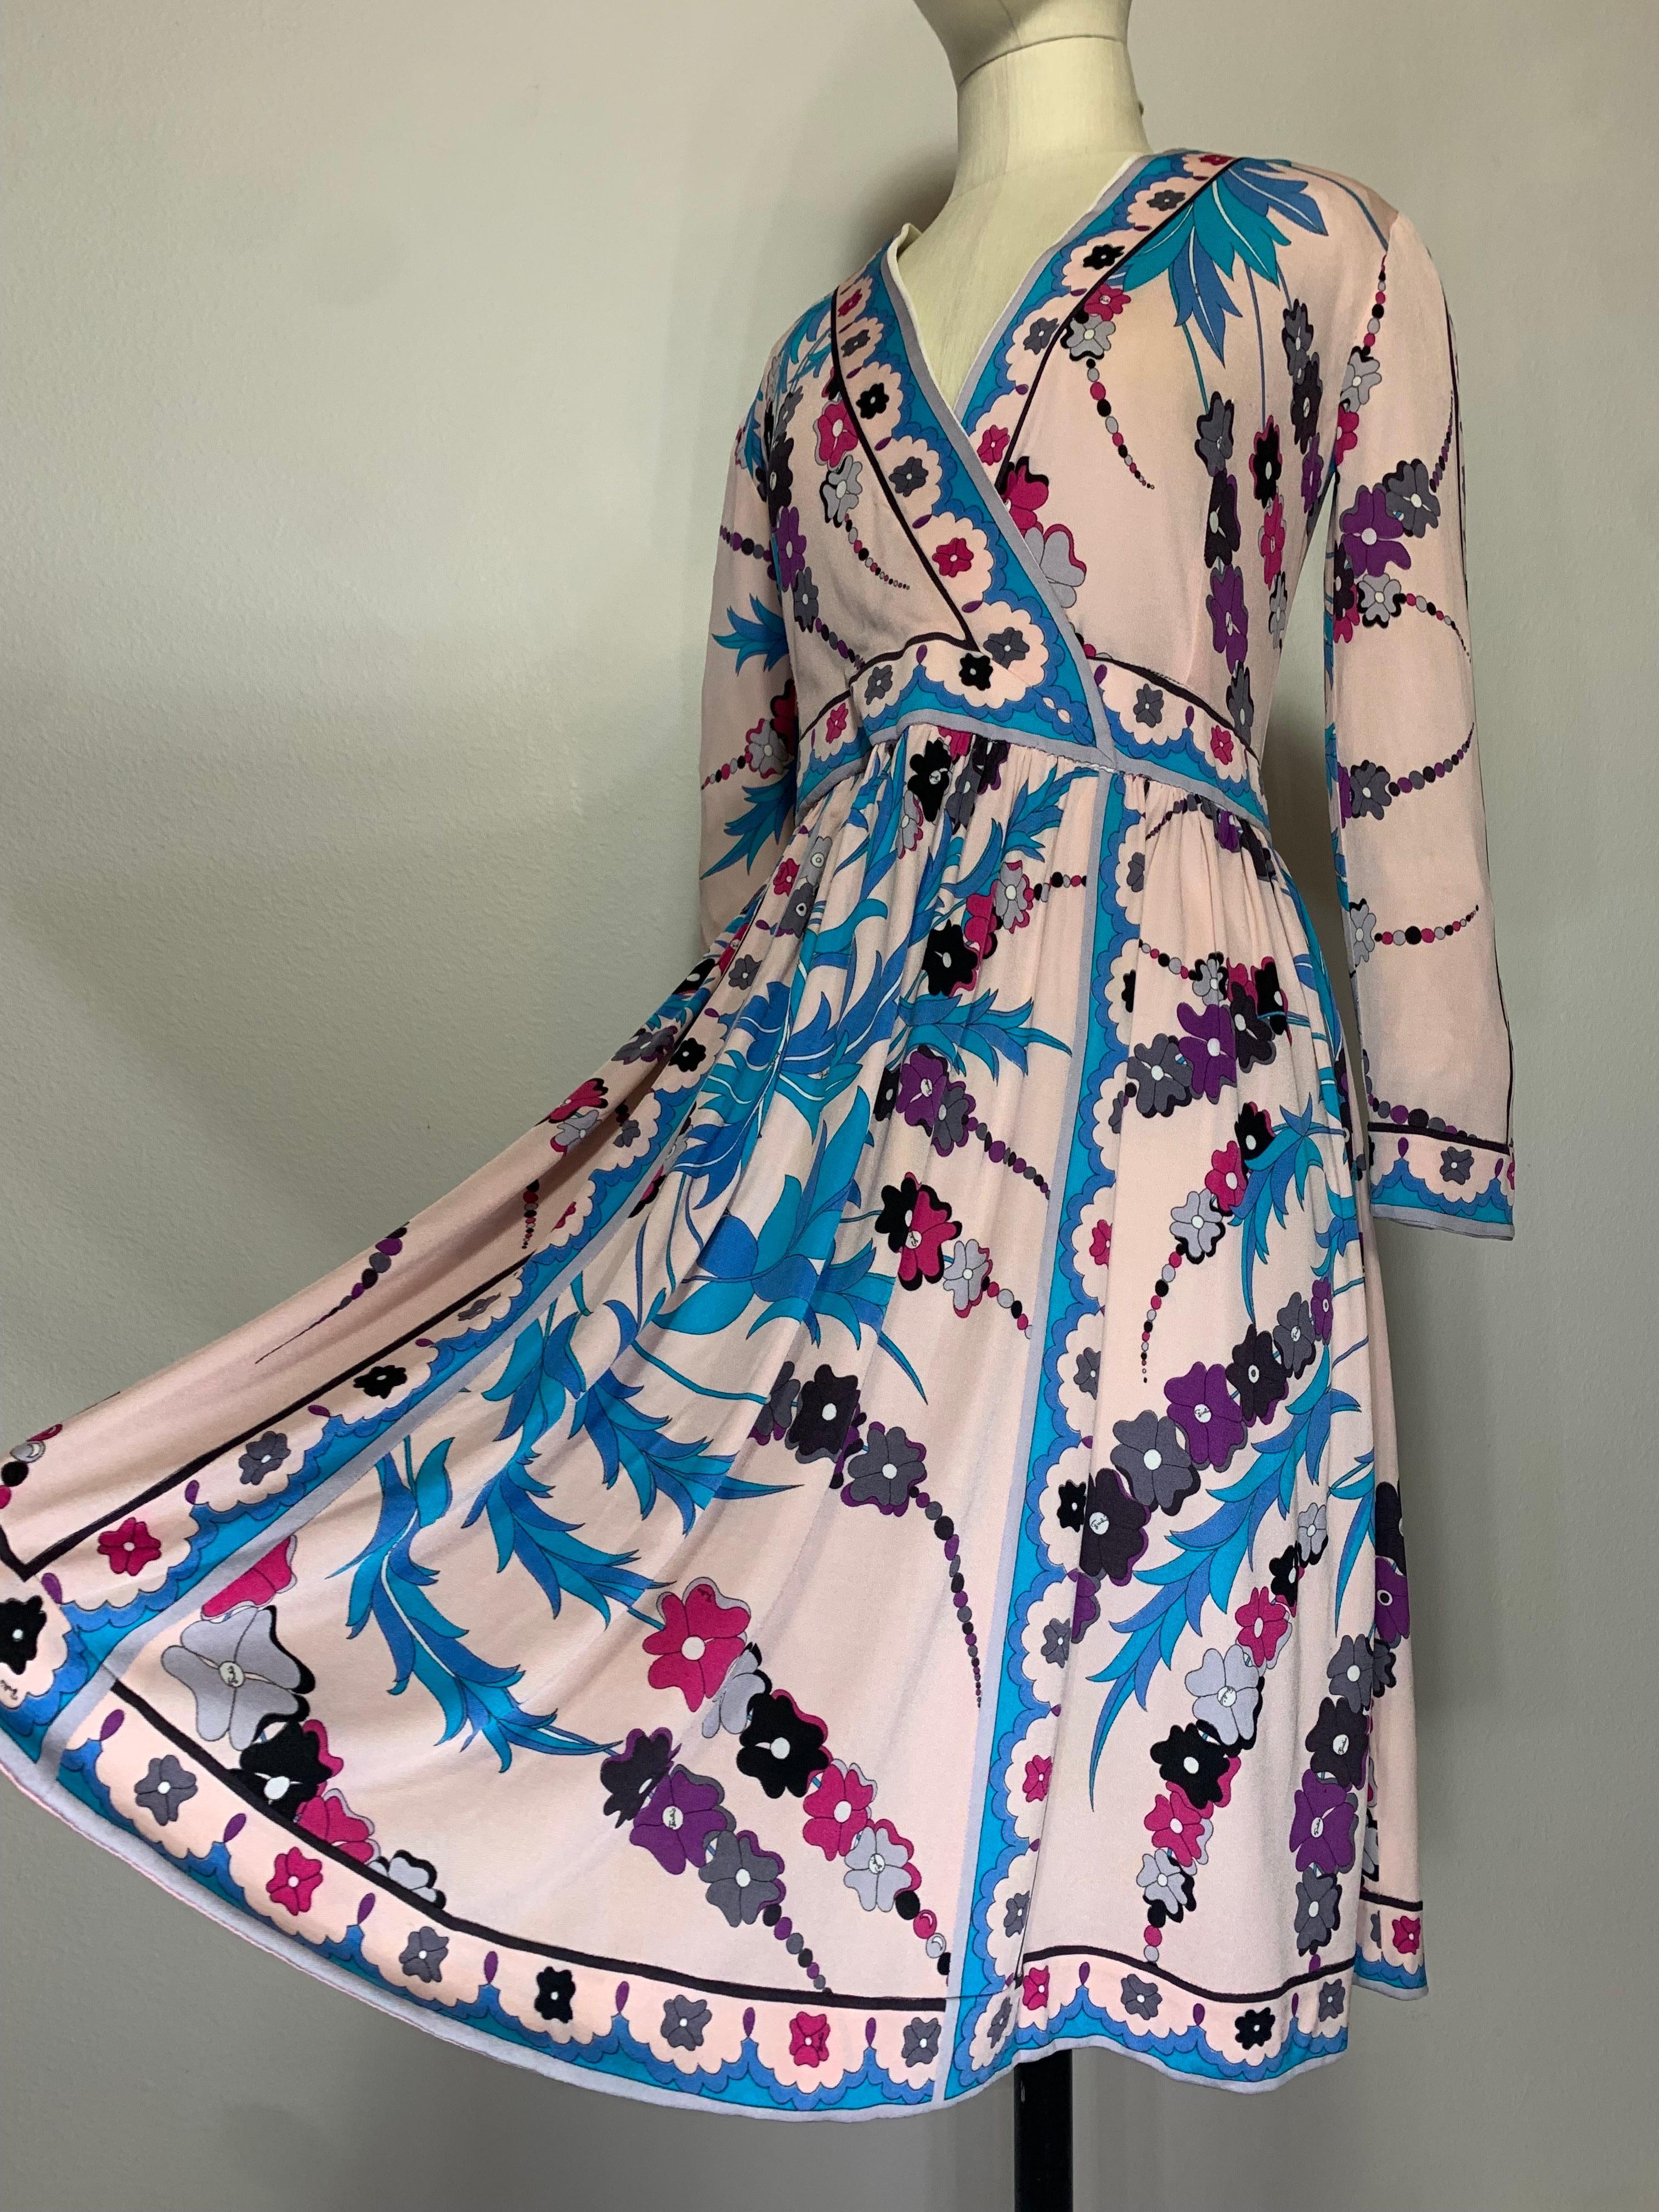 1970s Emilio Pucci Silk Jersey Floral Print Wrap Dress w Full Skirt & Band Trim In Excellent Condition For Sale In Gresham, OR